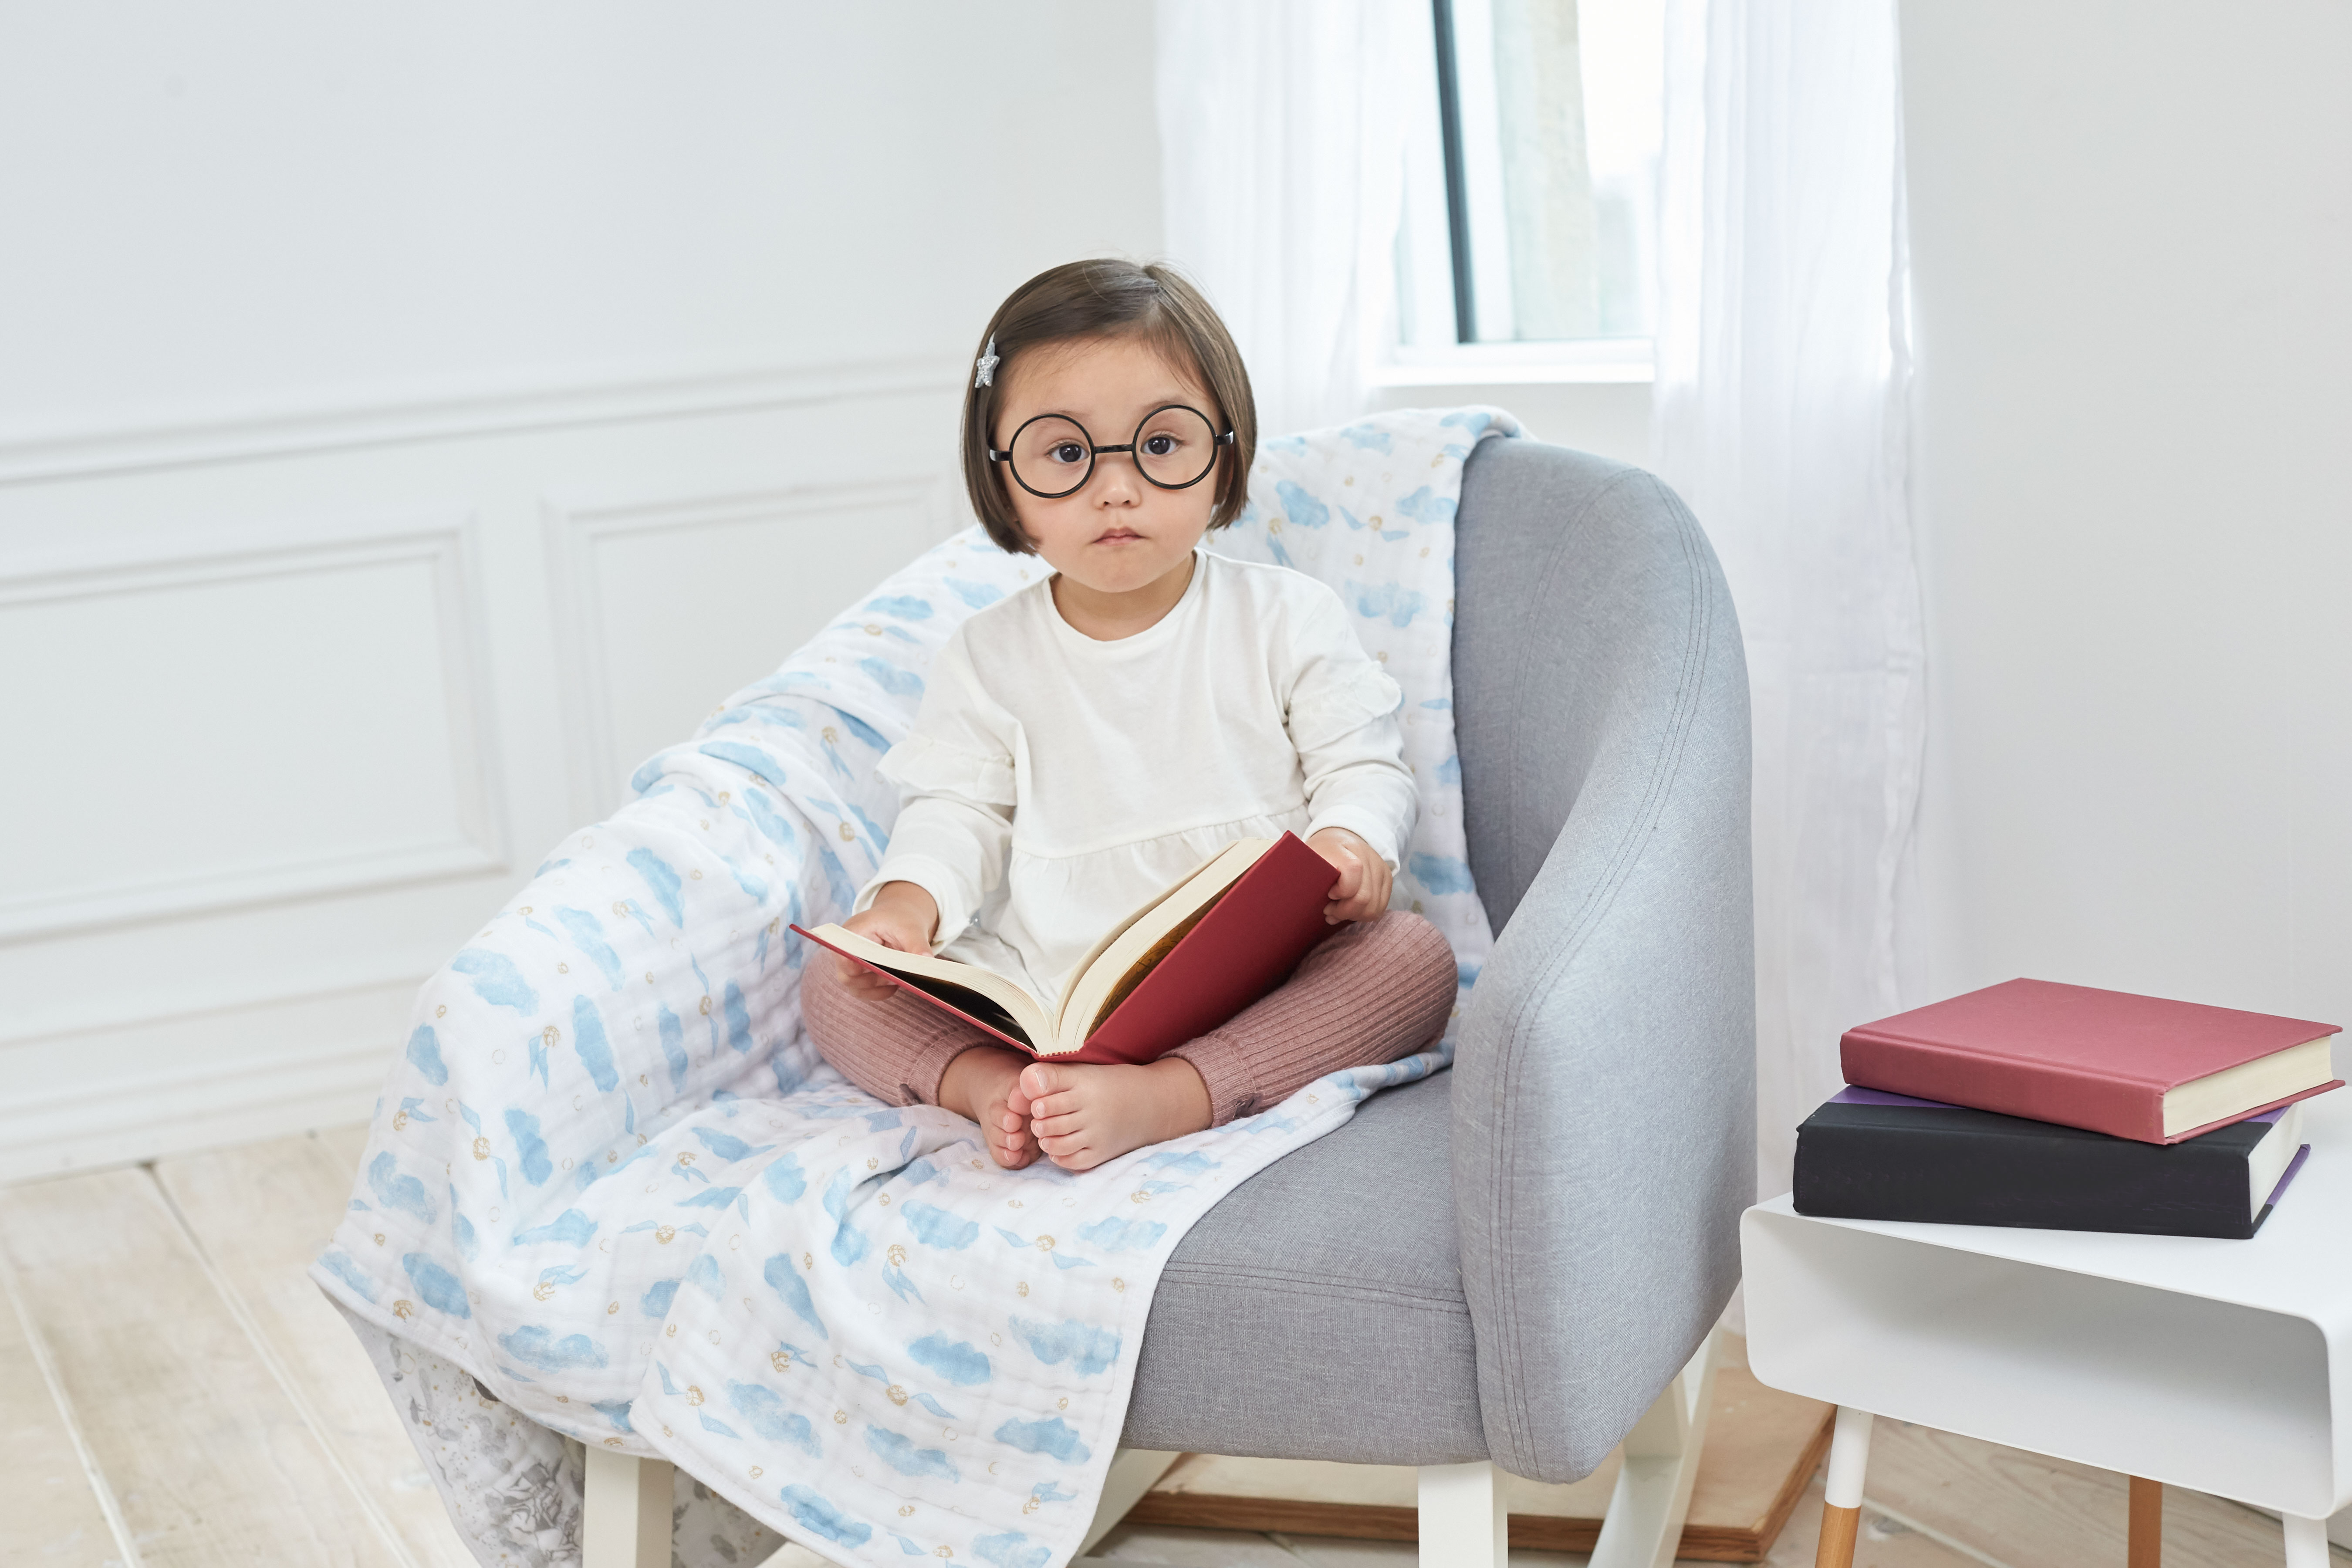 Baby in round glasses with a book